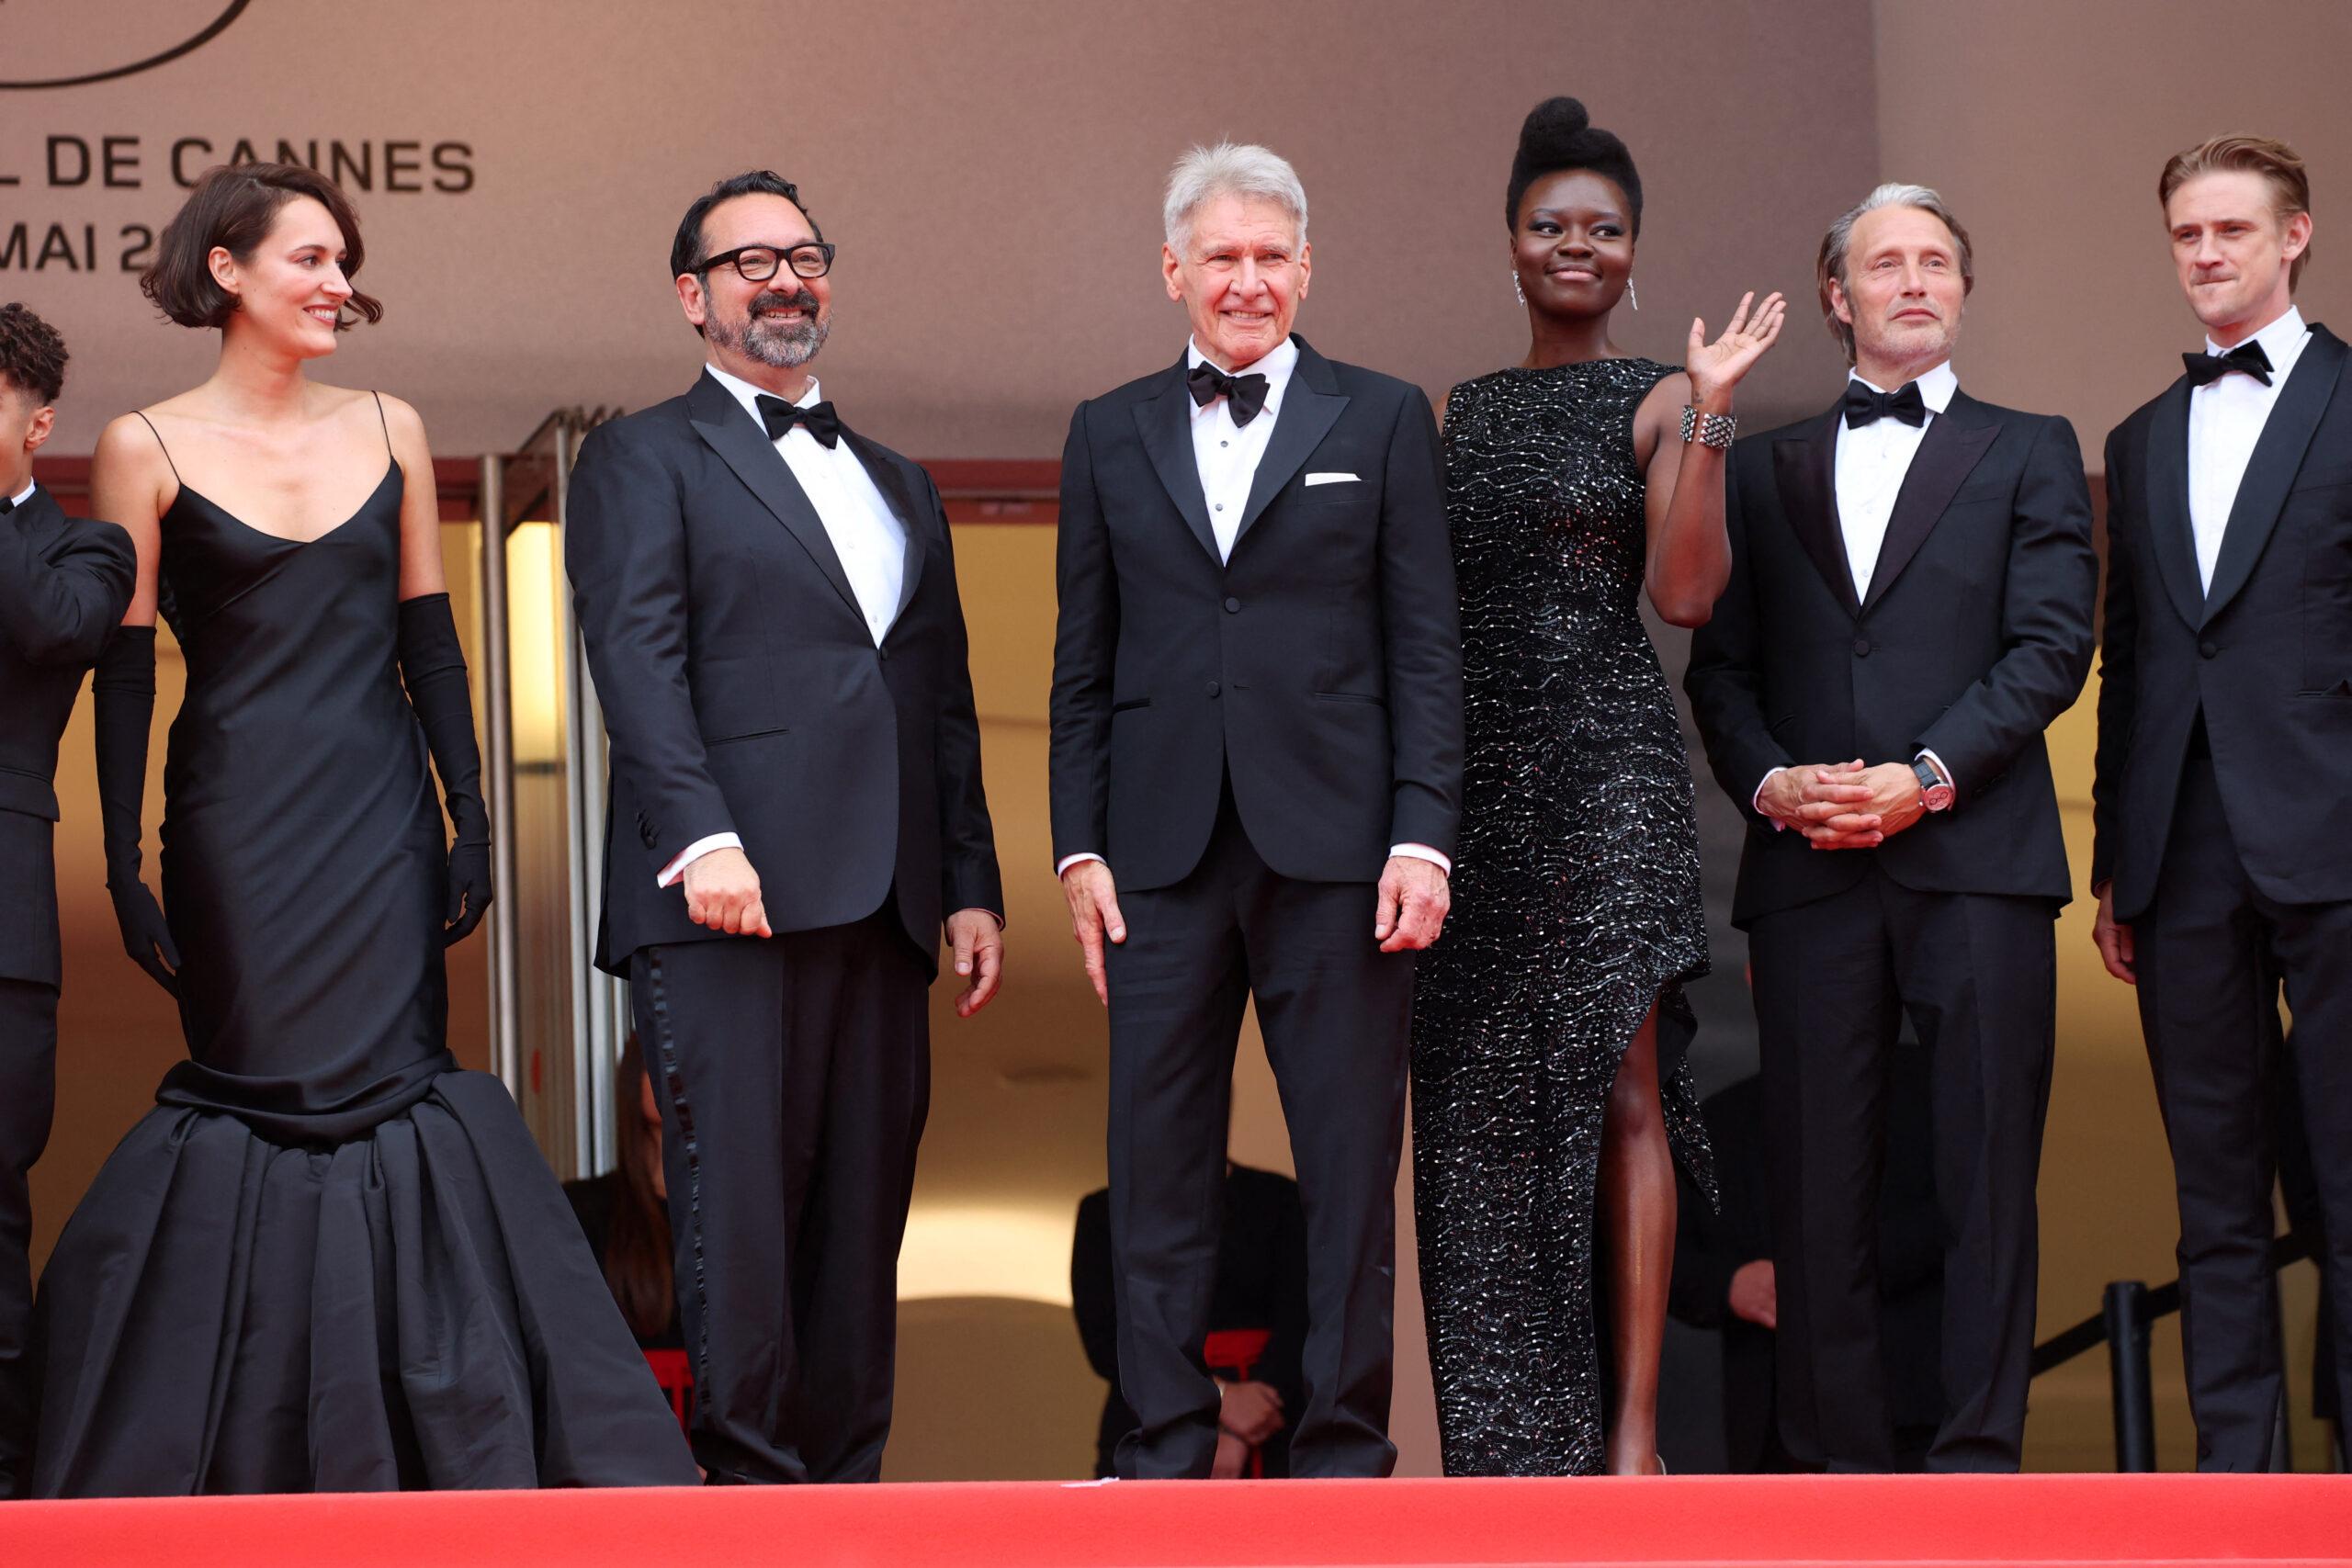 Indiana Jones And The Dial Of Destiny" red carpet during the 76th annual Cannes film festival at Palais des Festivals on May 18, 2023 in Cannes, France. 18 May 2023 Pictured: Kathleen Kennedy, Ethann Isidore, Phoebe Waller-Bridge, James Mangold, Shaunette Renée Wilson, Boyd Holbrook, Mads Mikkelsen, Frank Marshall, Harrison Ford. Photo credit: KCS Presse / MEGA TheMegaAgency.com +1 888 505 6342 (Mega Agency TagID: MEGA983453_087.jpg) [Photo via Mega Agency]